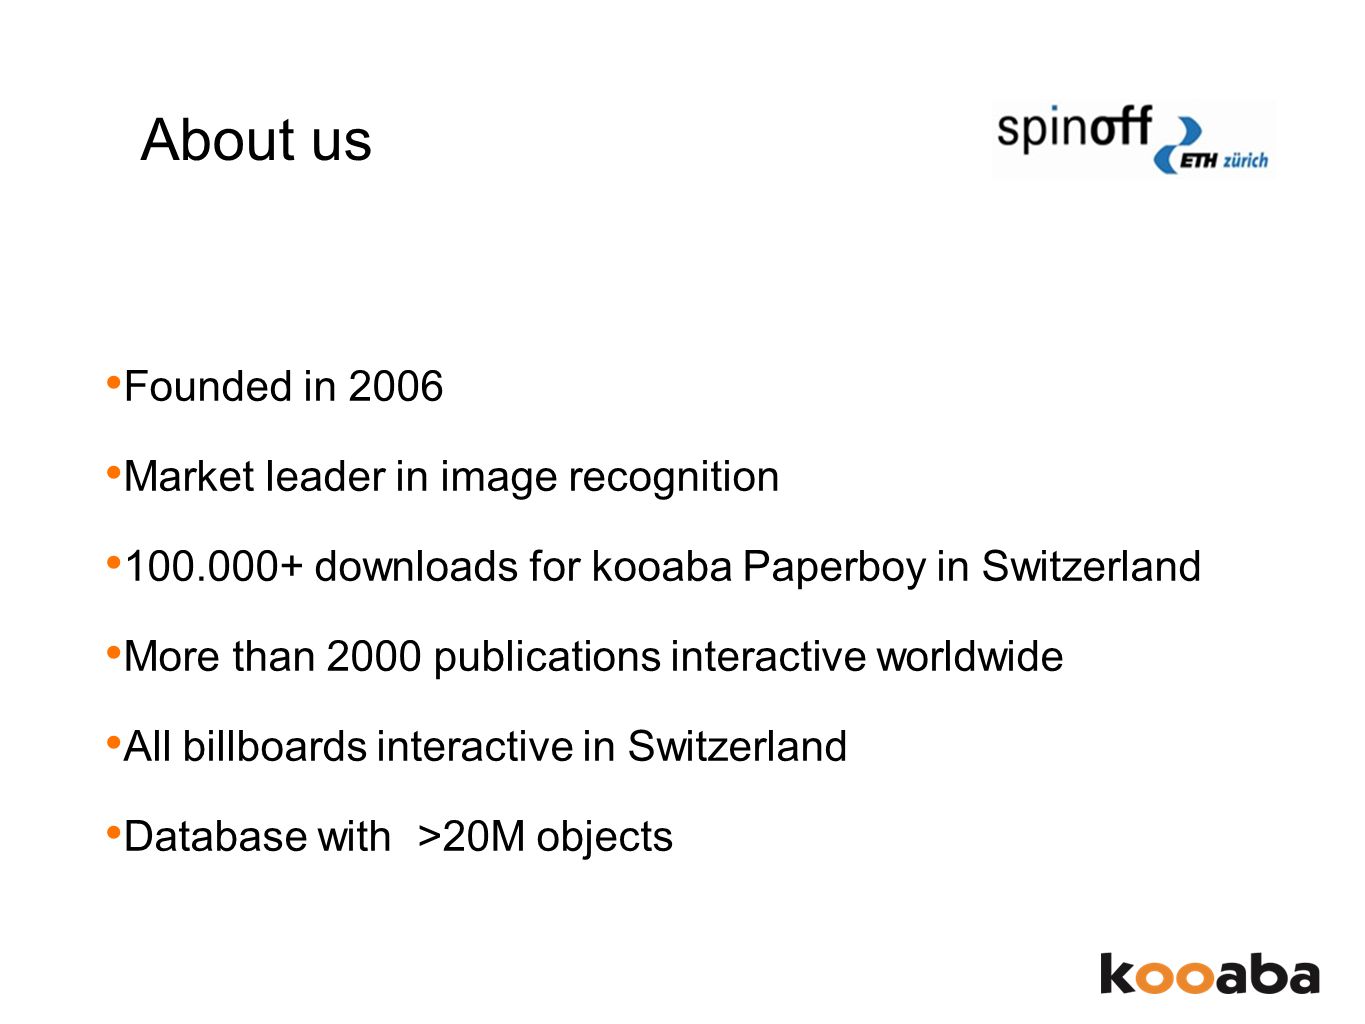 About us Founded in 2006 Market leader in image recognition downloads for kooaba Paperboy in Switzerland More than 2000 publications interactive worldwide All billboards interactive in Switzerland Database with >20M objects